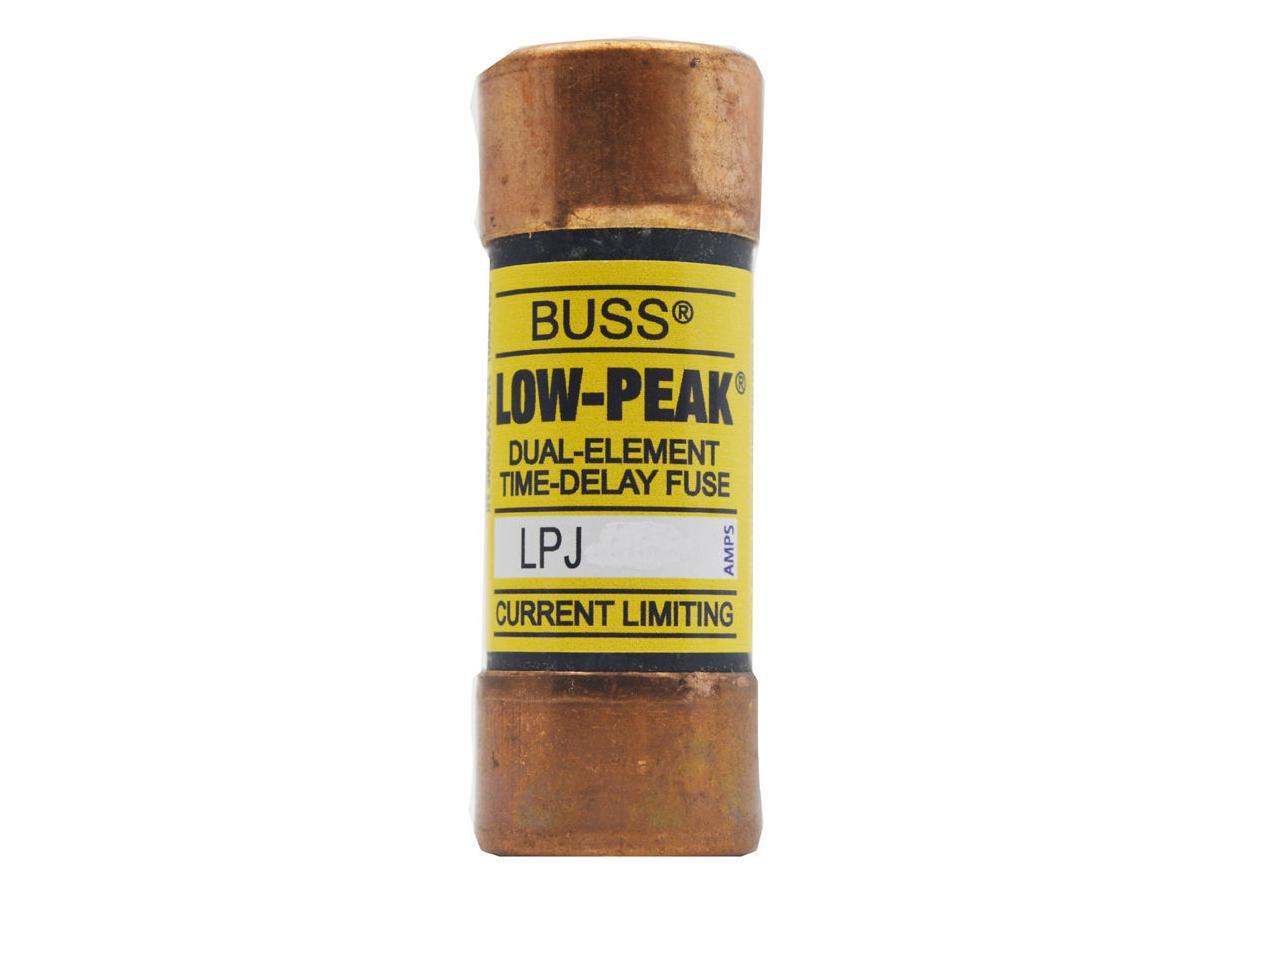 Free UPS 3 Day Shipping Cooper Bussmann LPJ-20SP Fuses Box of 10 